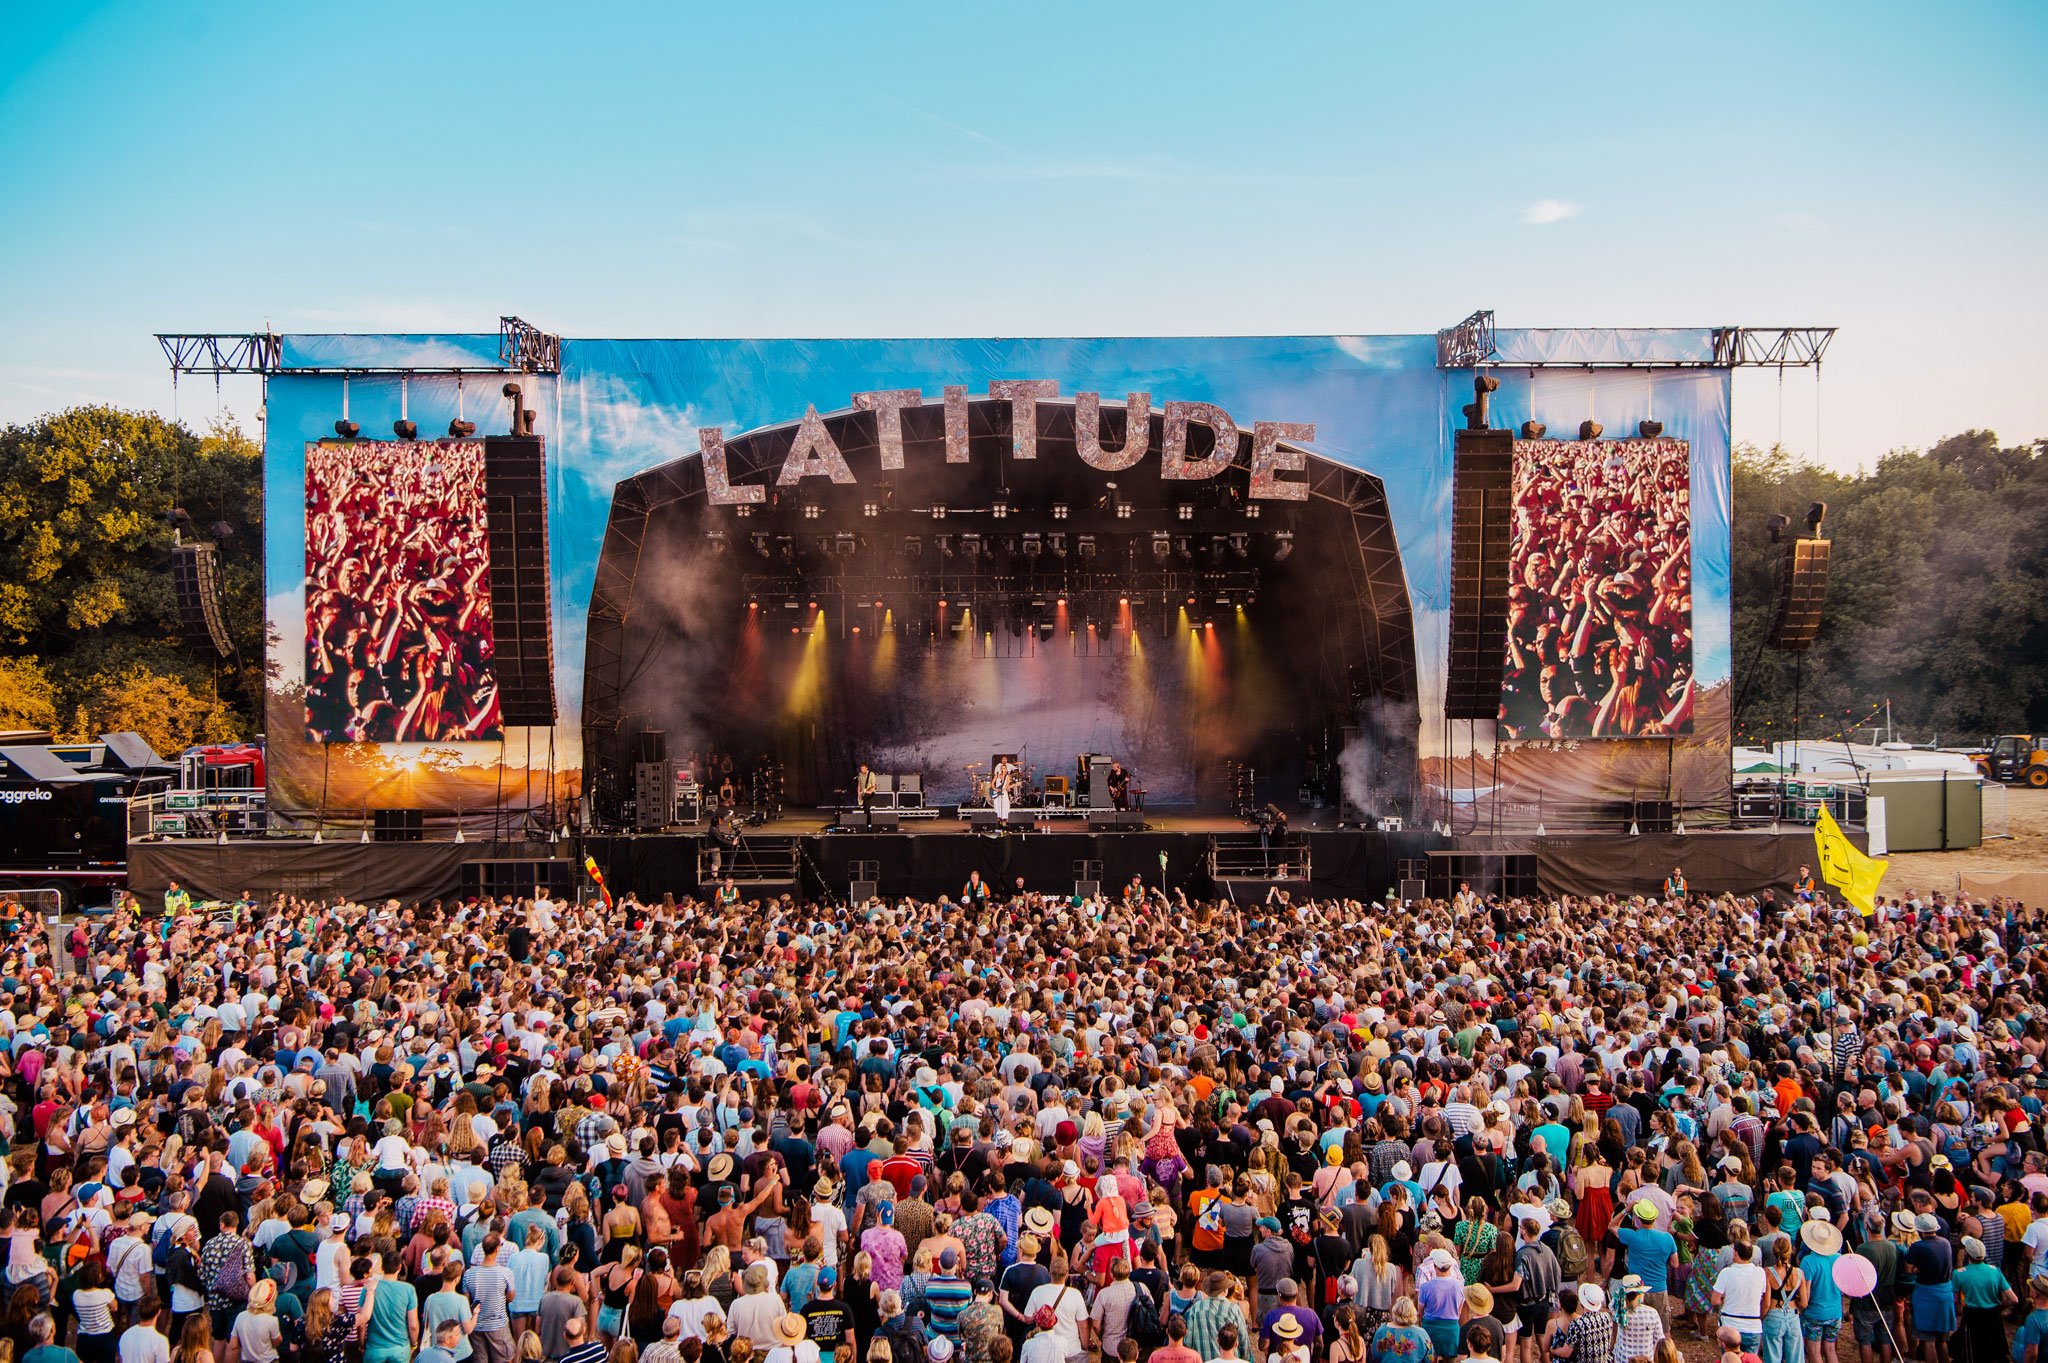 Latitude Festival will go ahead at full capacity as part of government pilot scheme